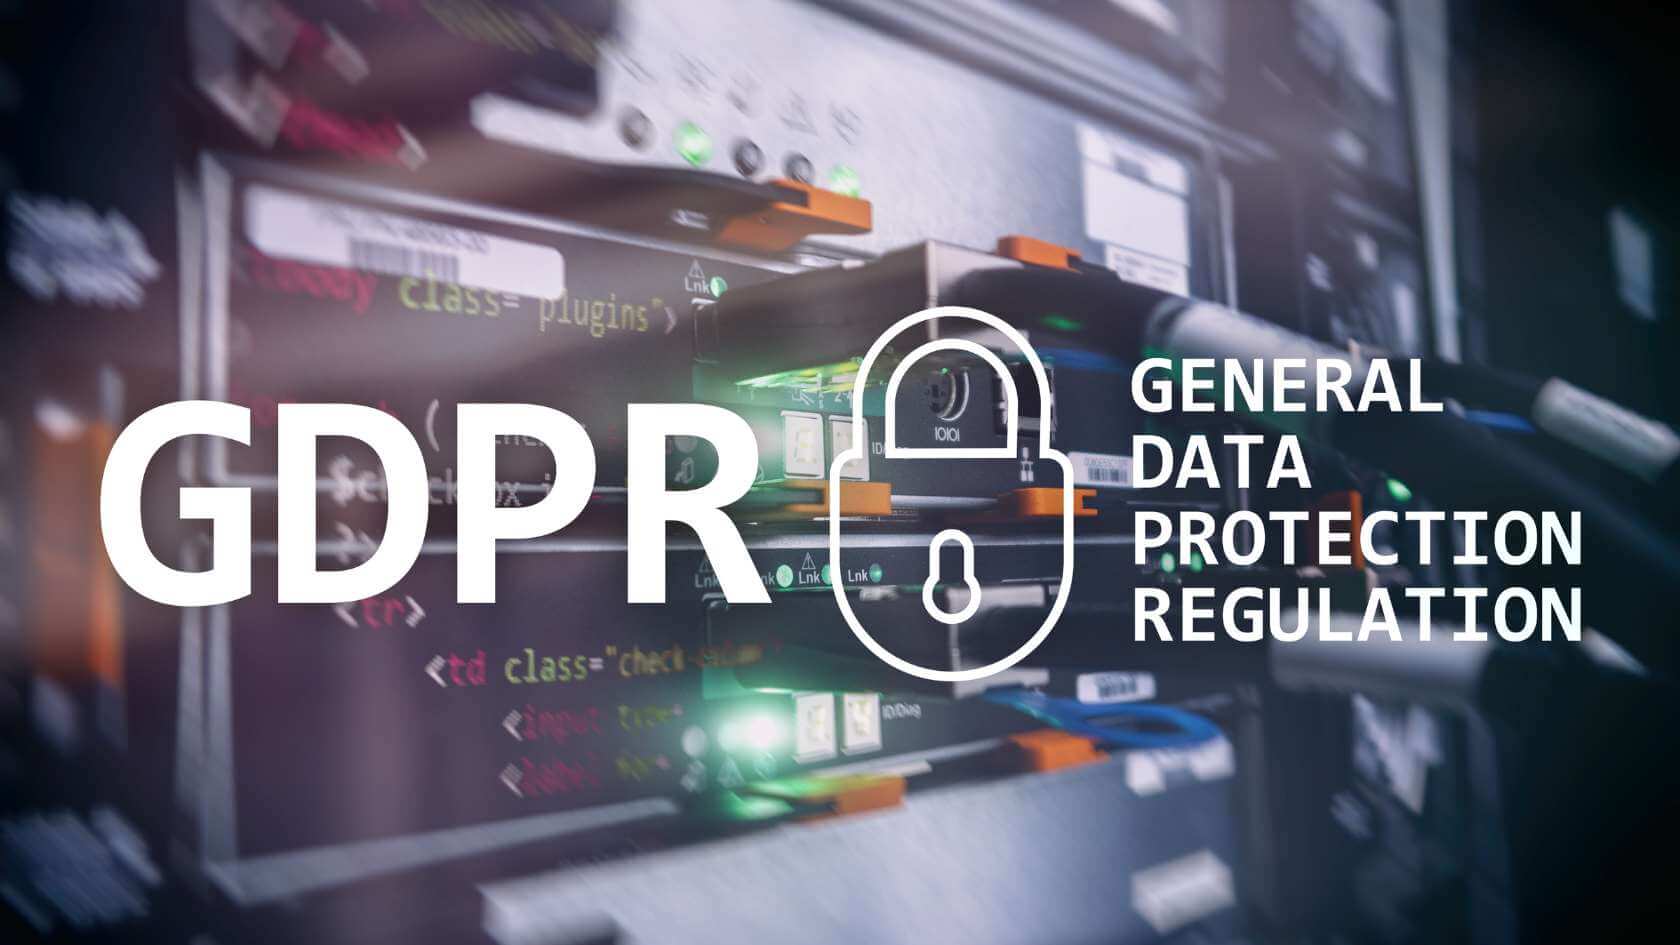 General Data Protection Regulation (GDPR) & Cyber Security Management